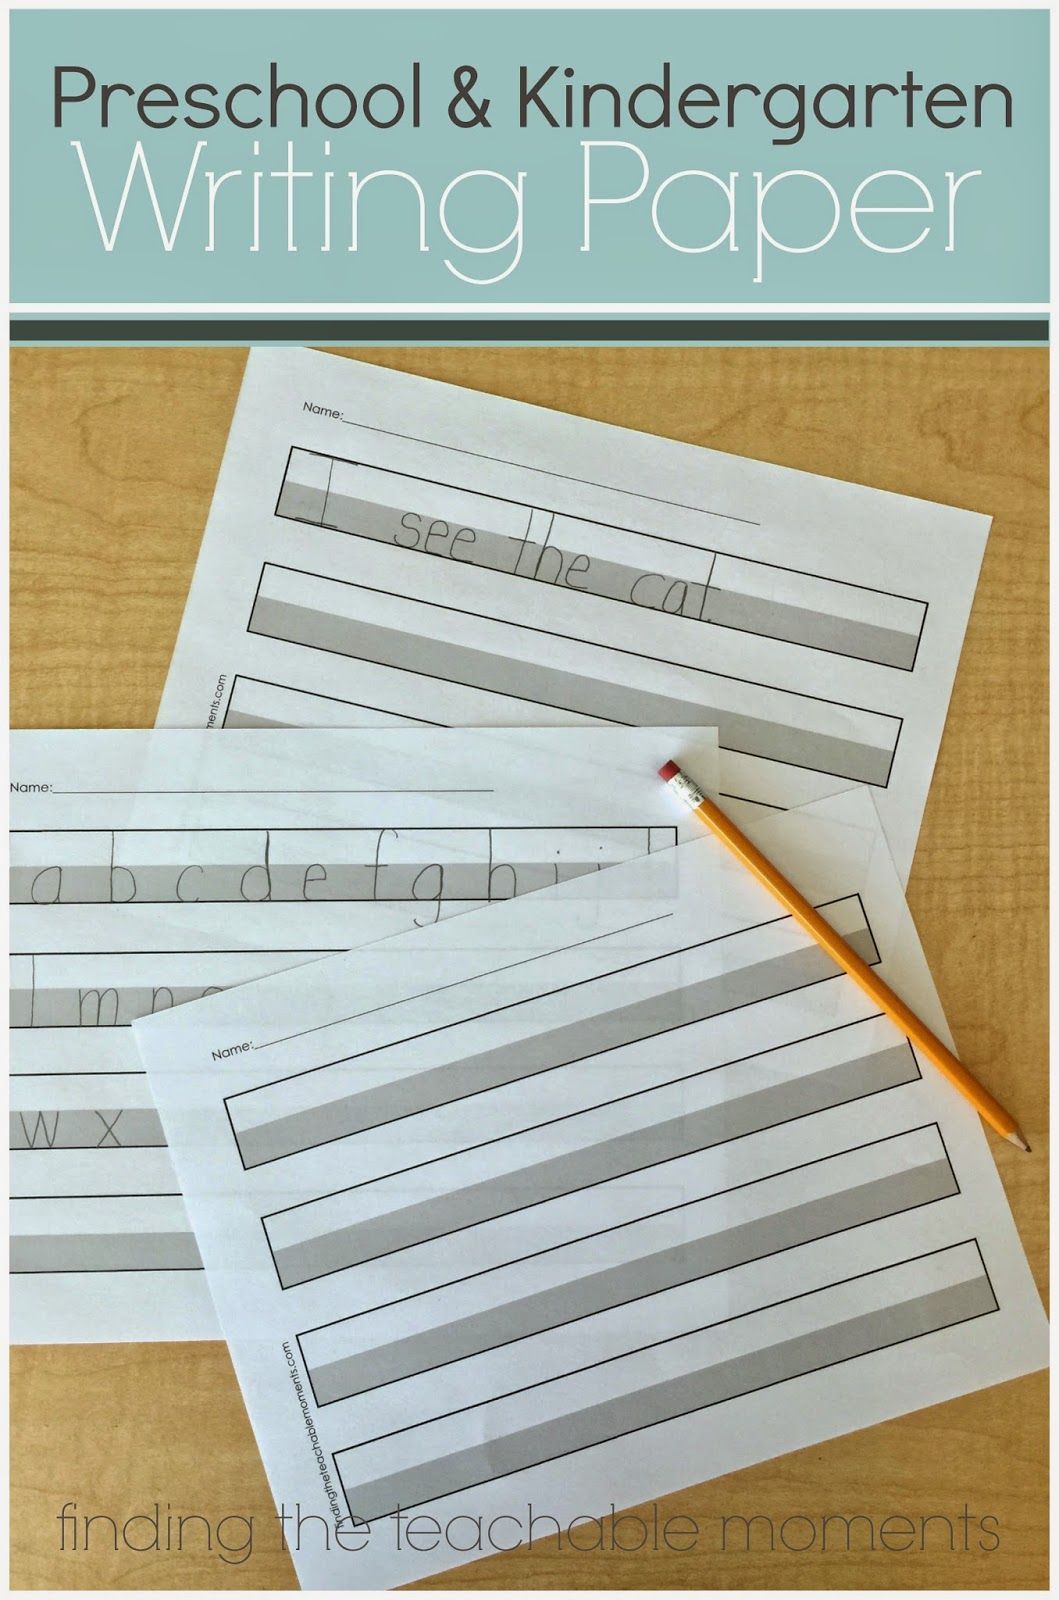 FREE printable handwriting paper for Preschool or Kindergarten. The gray area provides a visual cue to help with letter sizing and